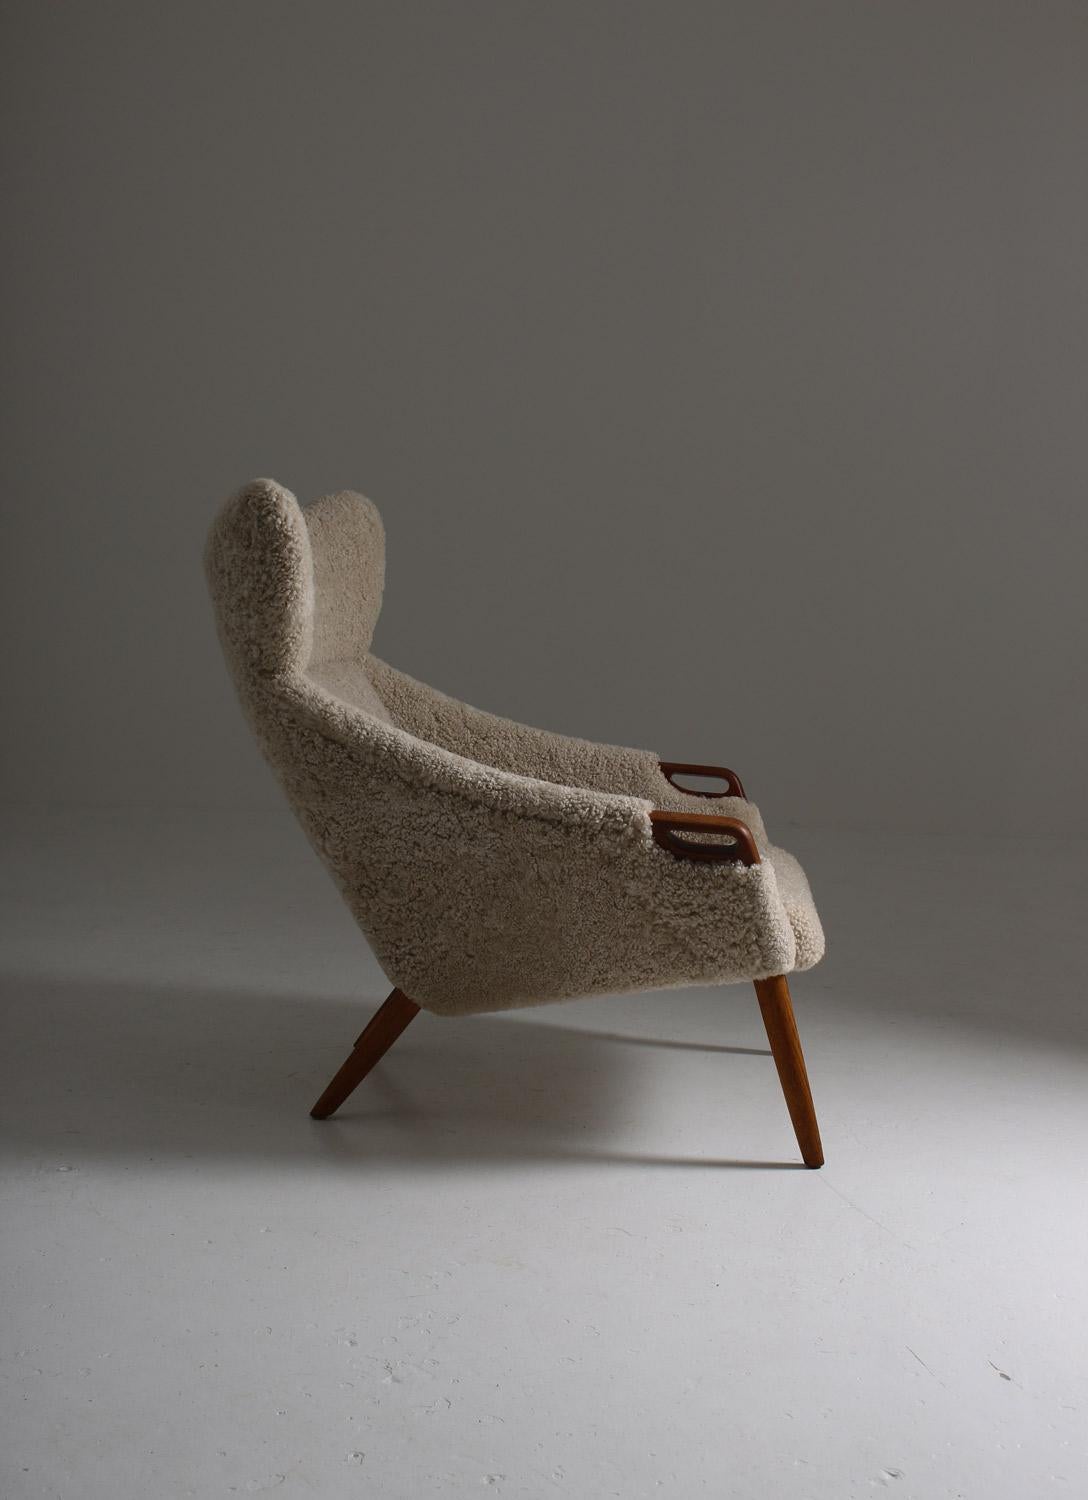 Danish high back wing chair model 55 by Kurt Østervig for Rolschau Møbler, Vejen.
This majestic chair looks great from any angle and, on top of that, is as comfortable as it looks. The details in teak match the off-white sheep skin